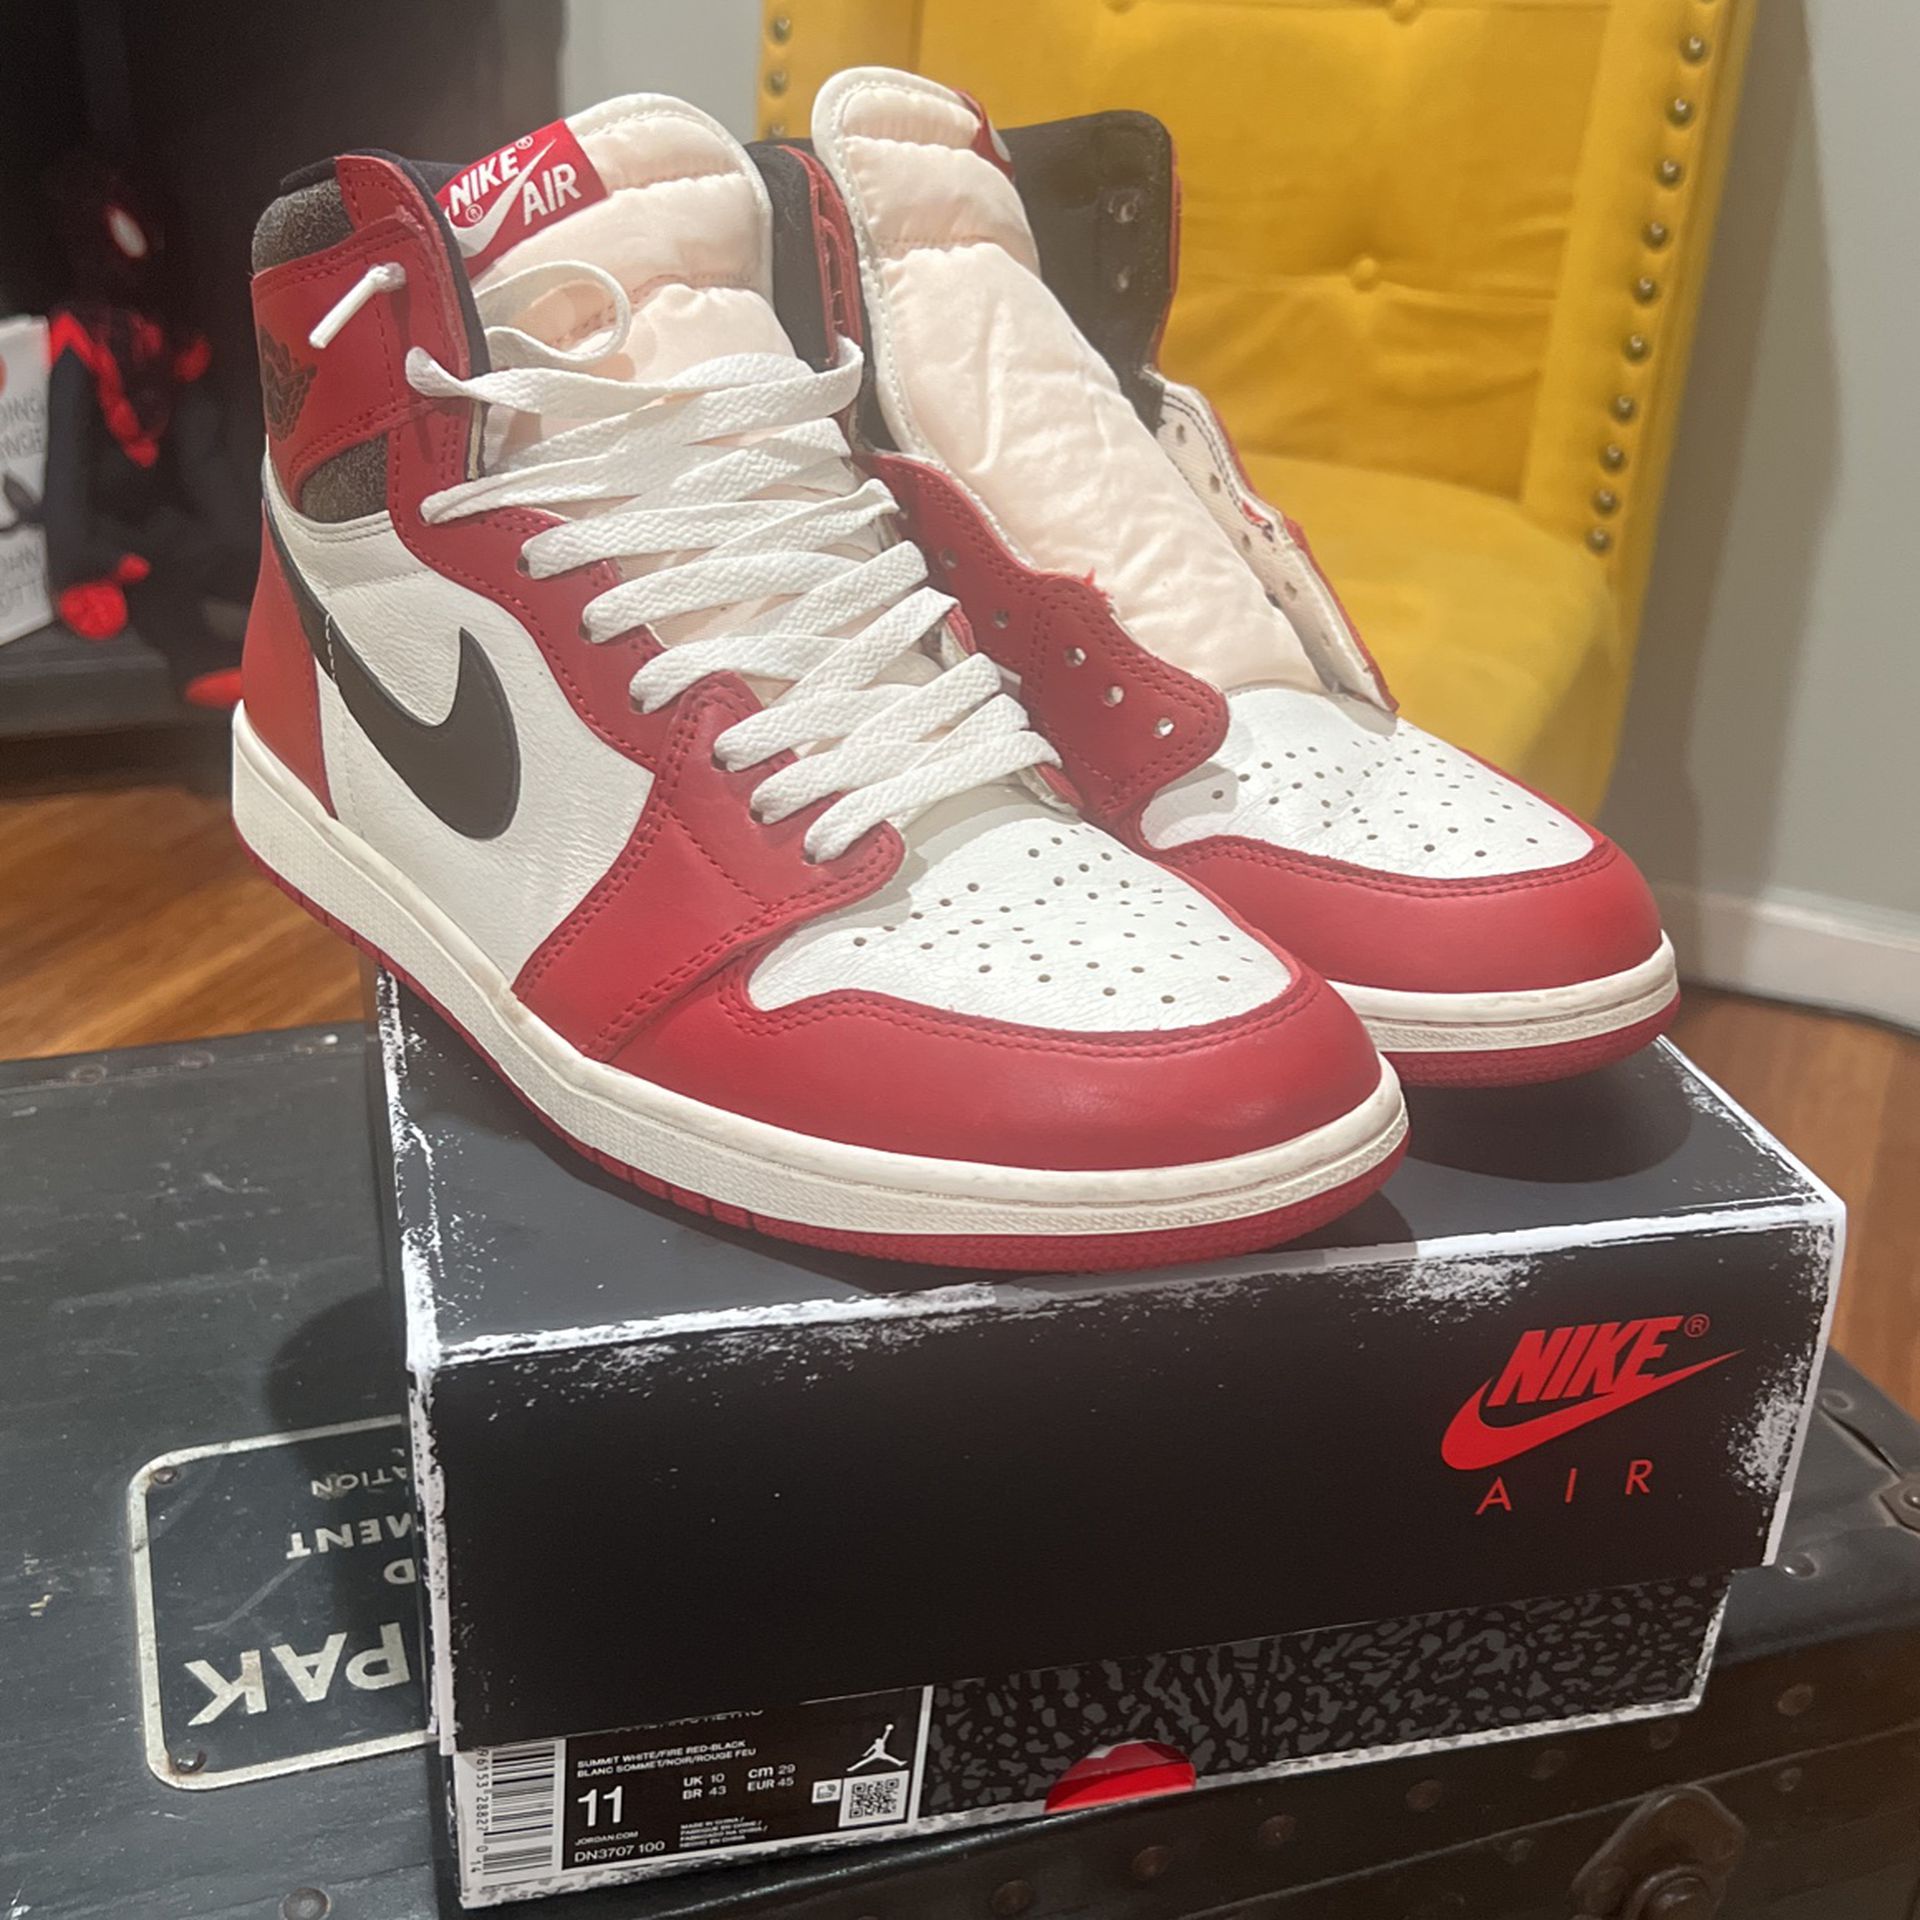 Jordan 1 Lost And Found Size 11 $275 OBO for Sale in Oxnard, CA - OfferUp